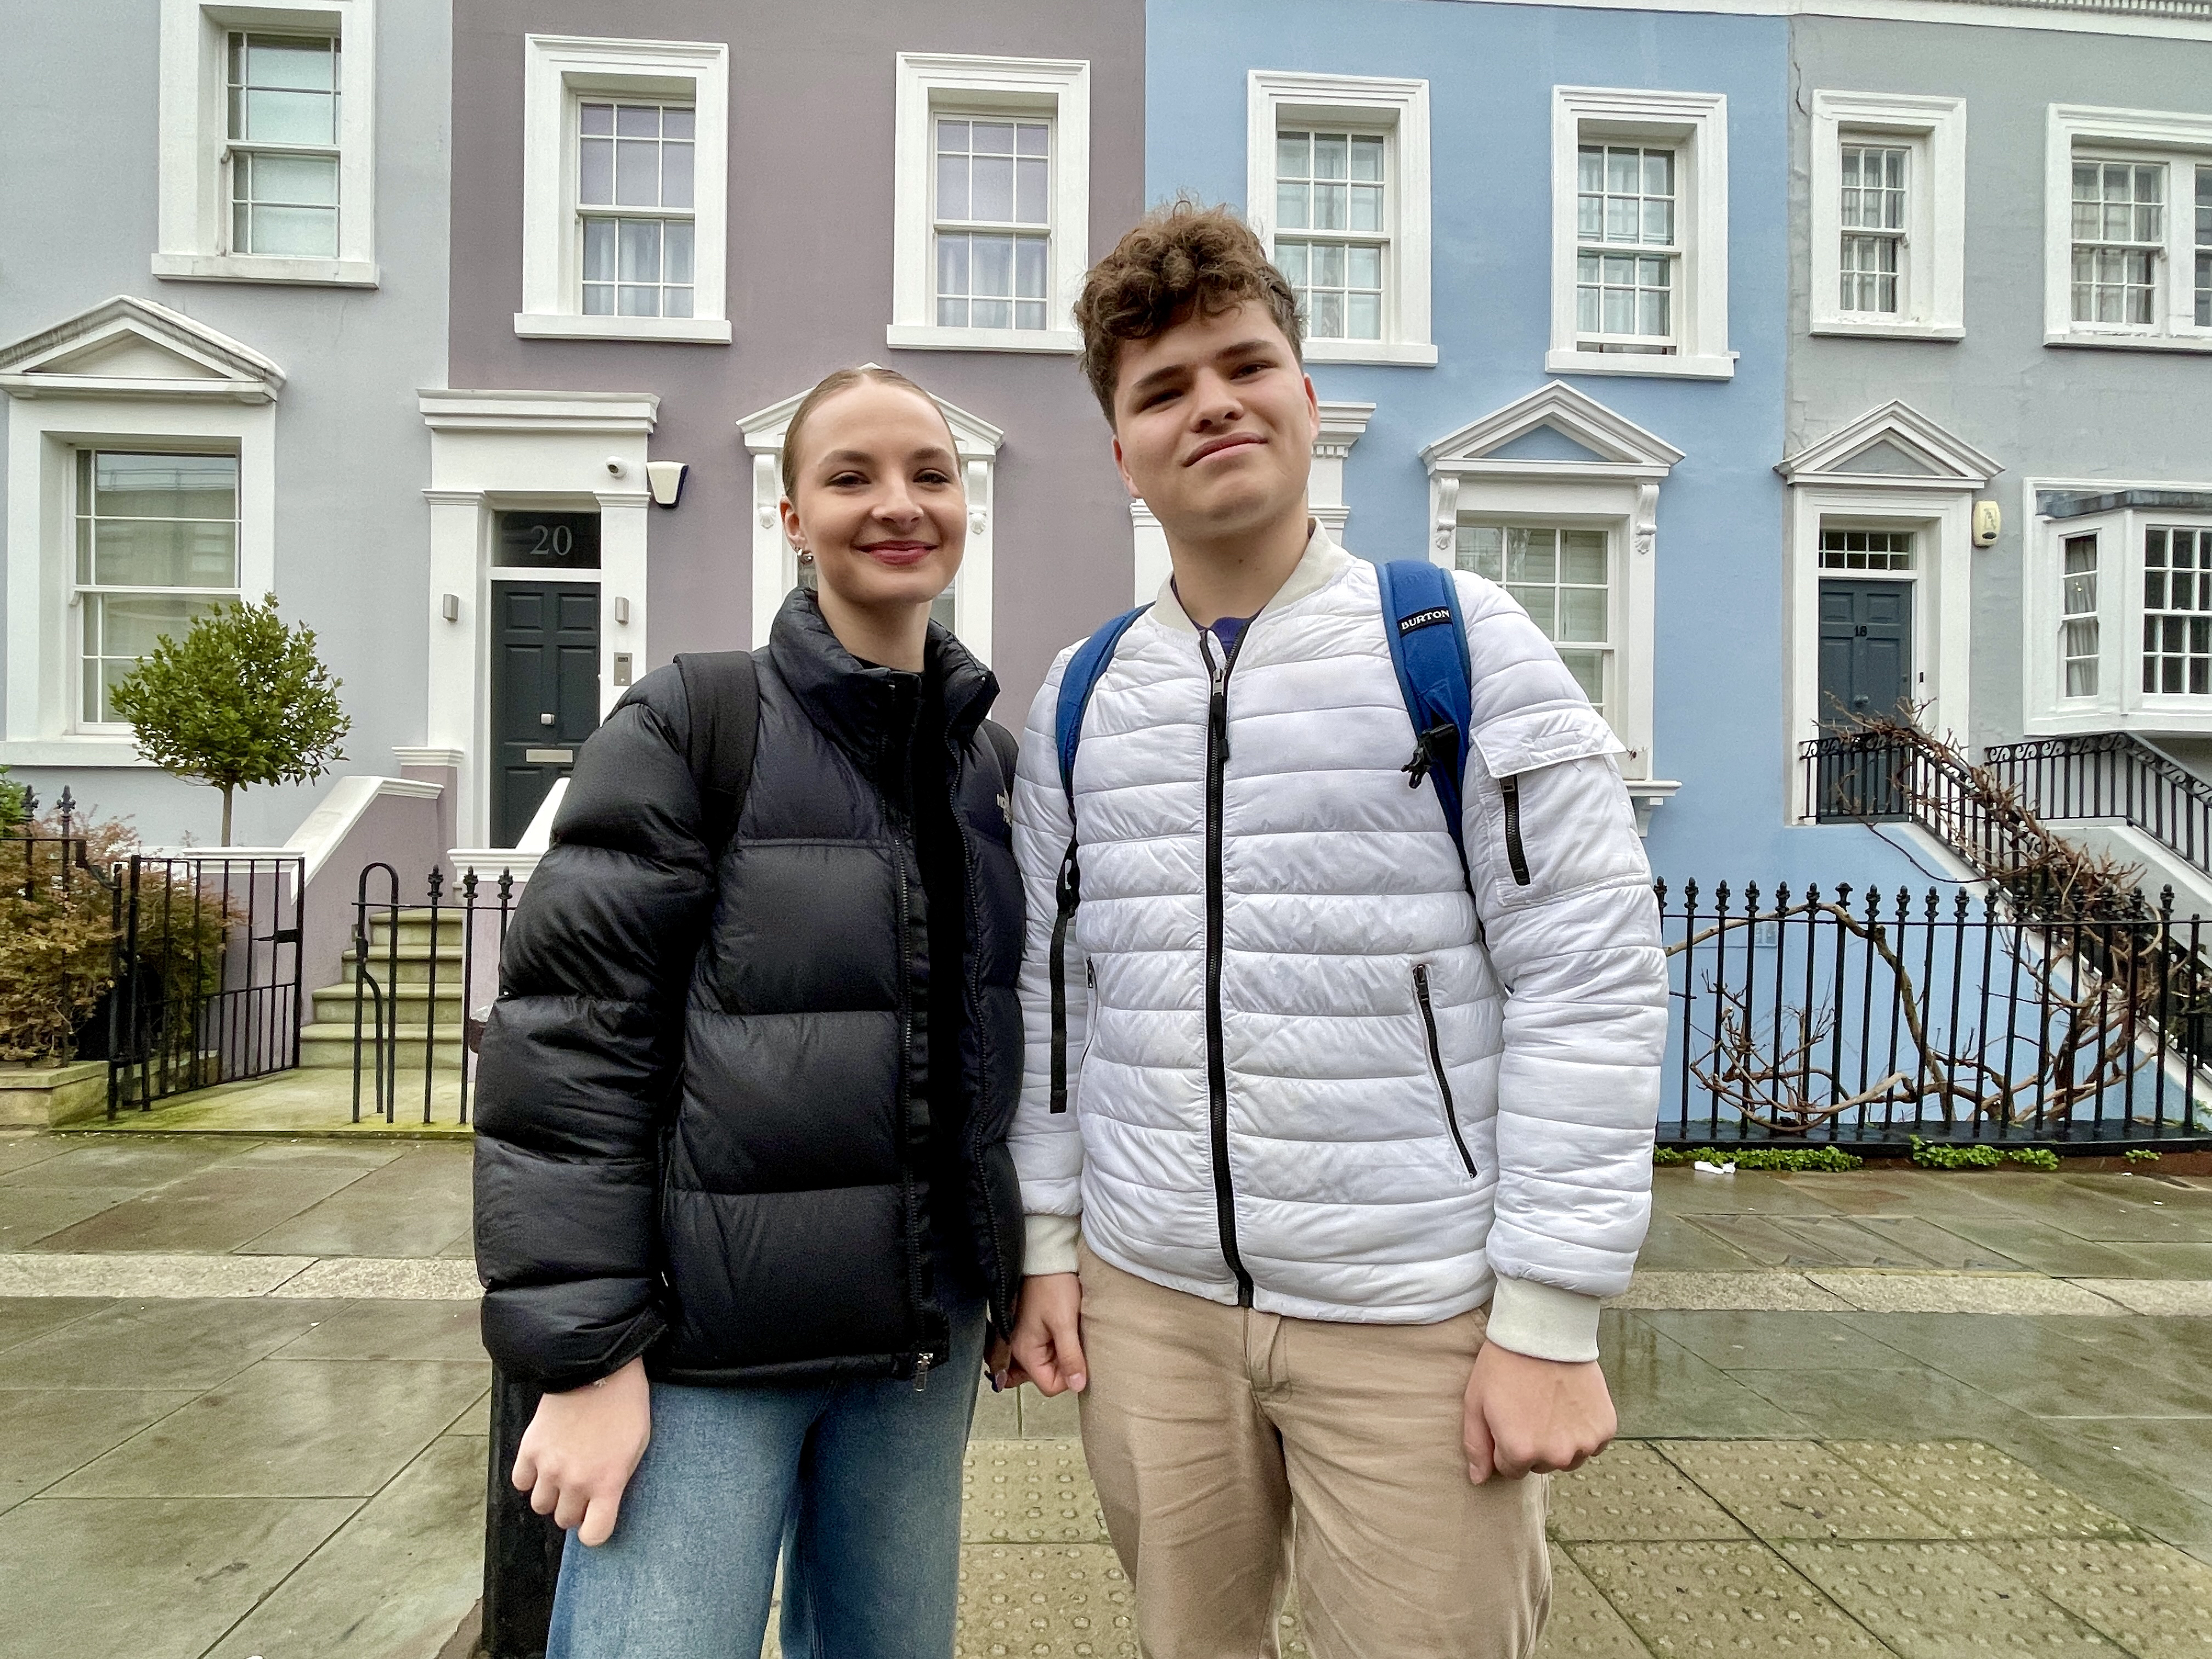 Tourists Aleksandra and Lucas from Poland said going to the village was one of their top priorities while in London